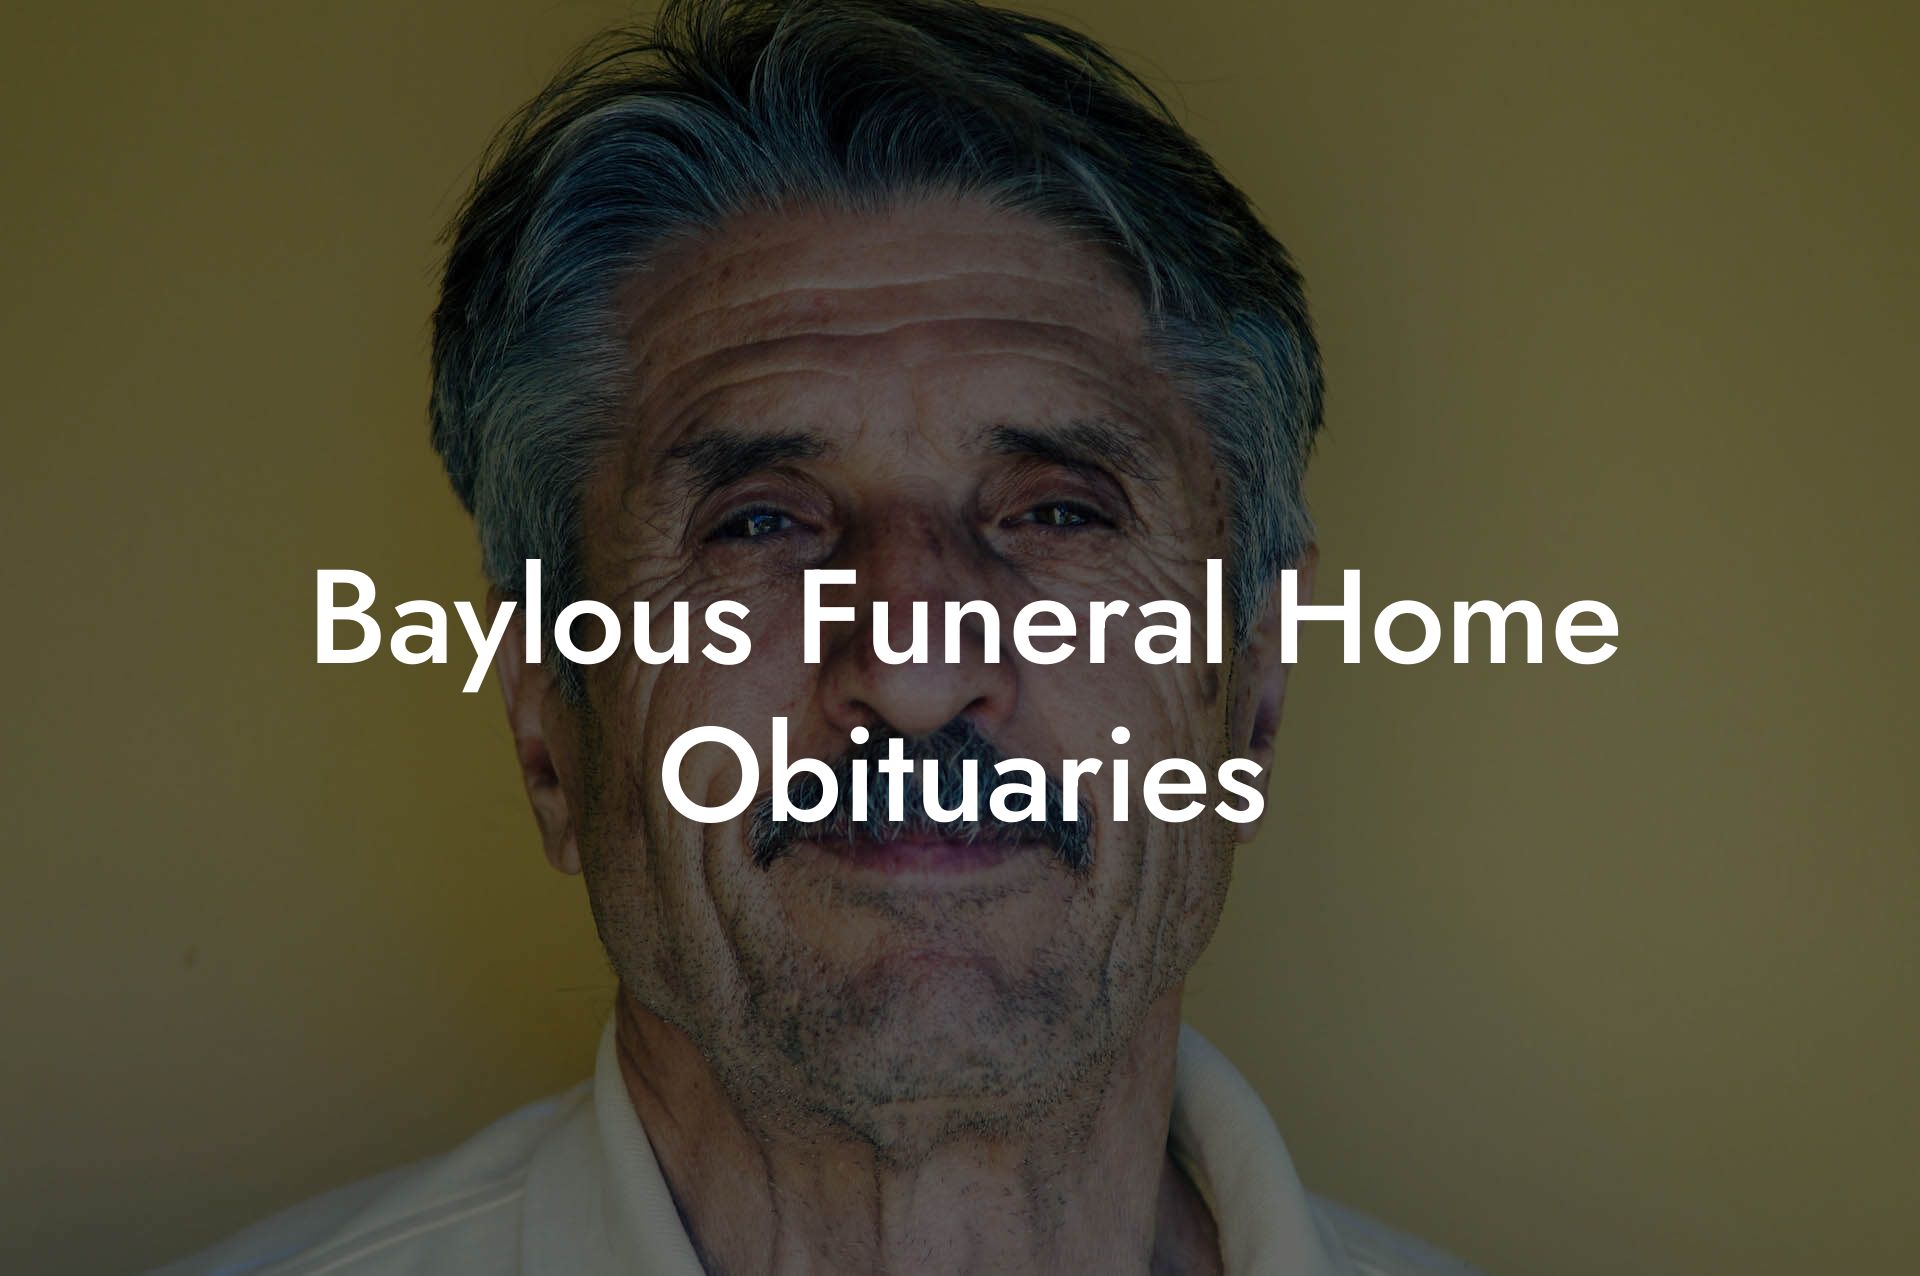 Baylous Funeral Home Obituaries